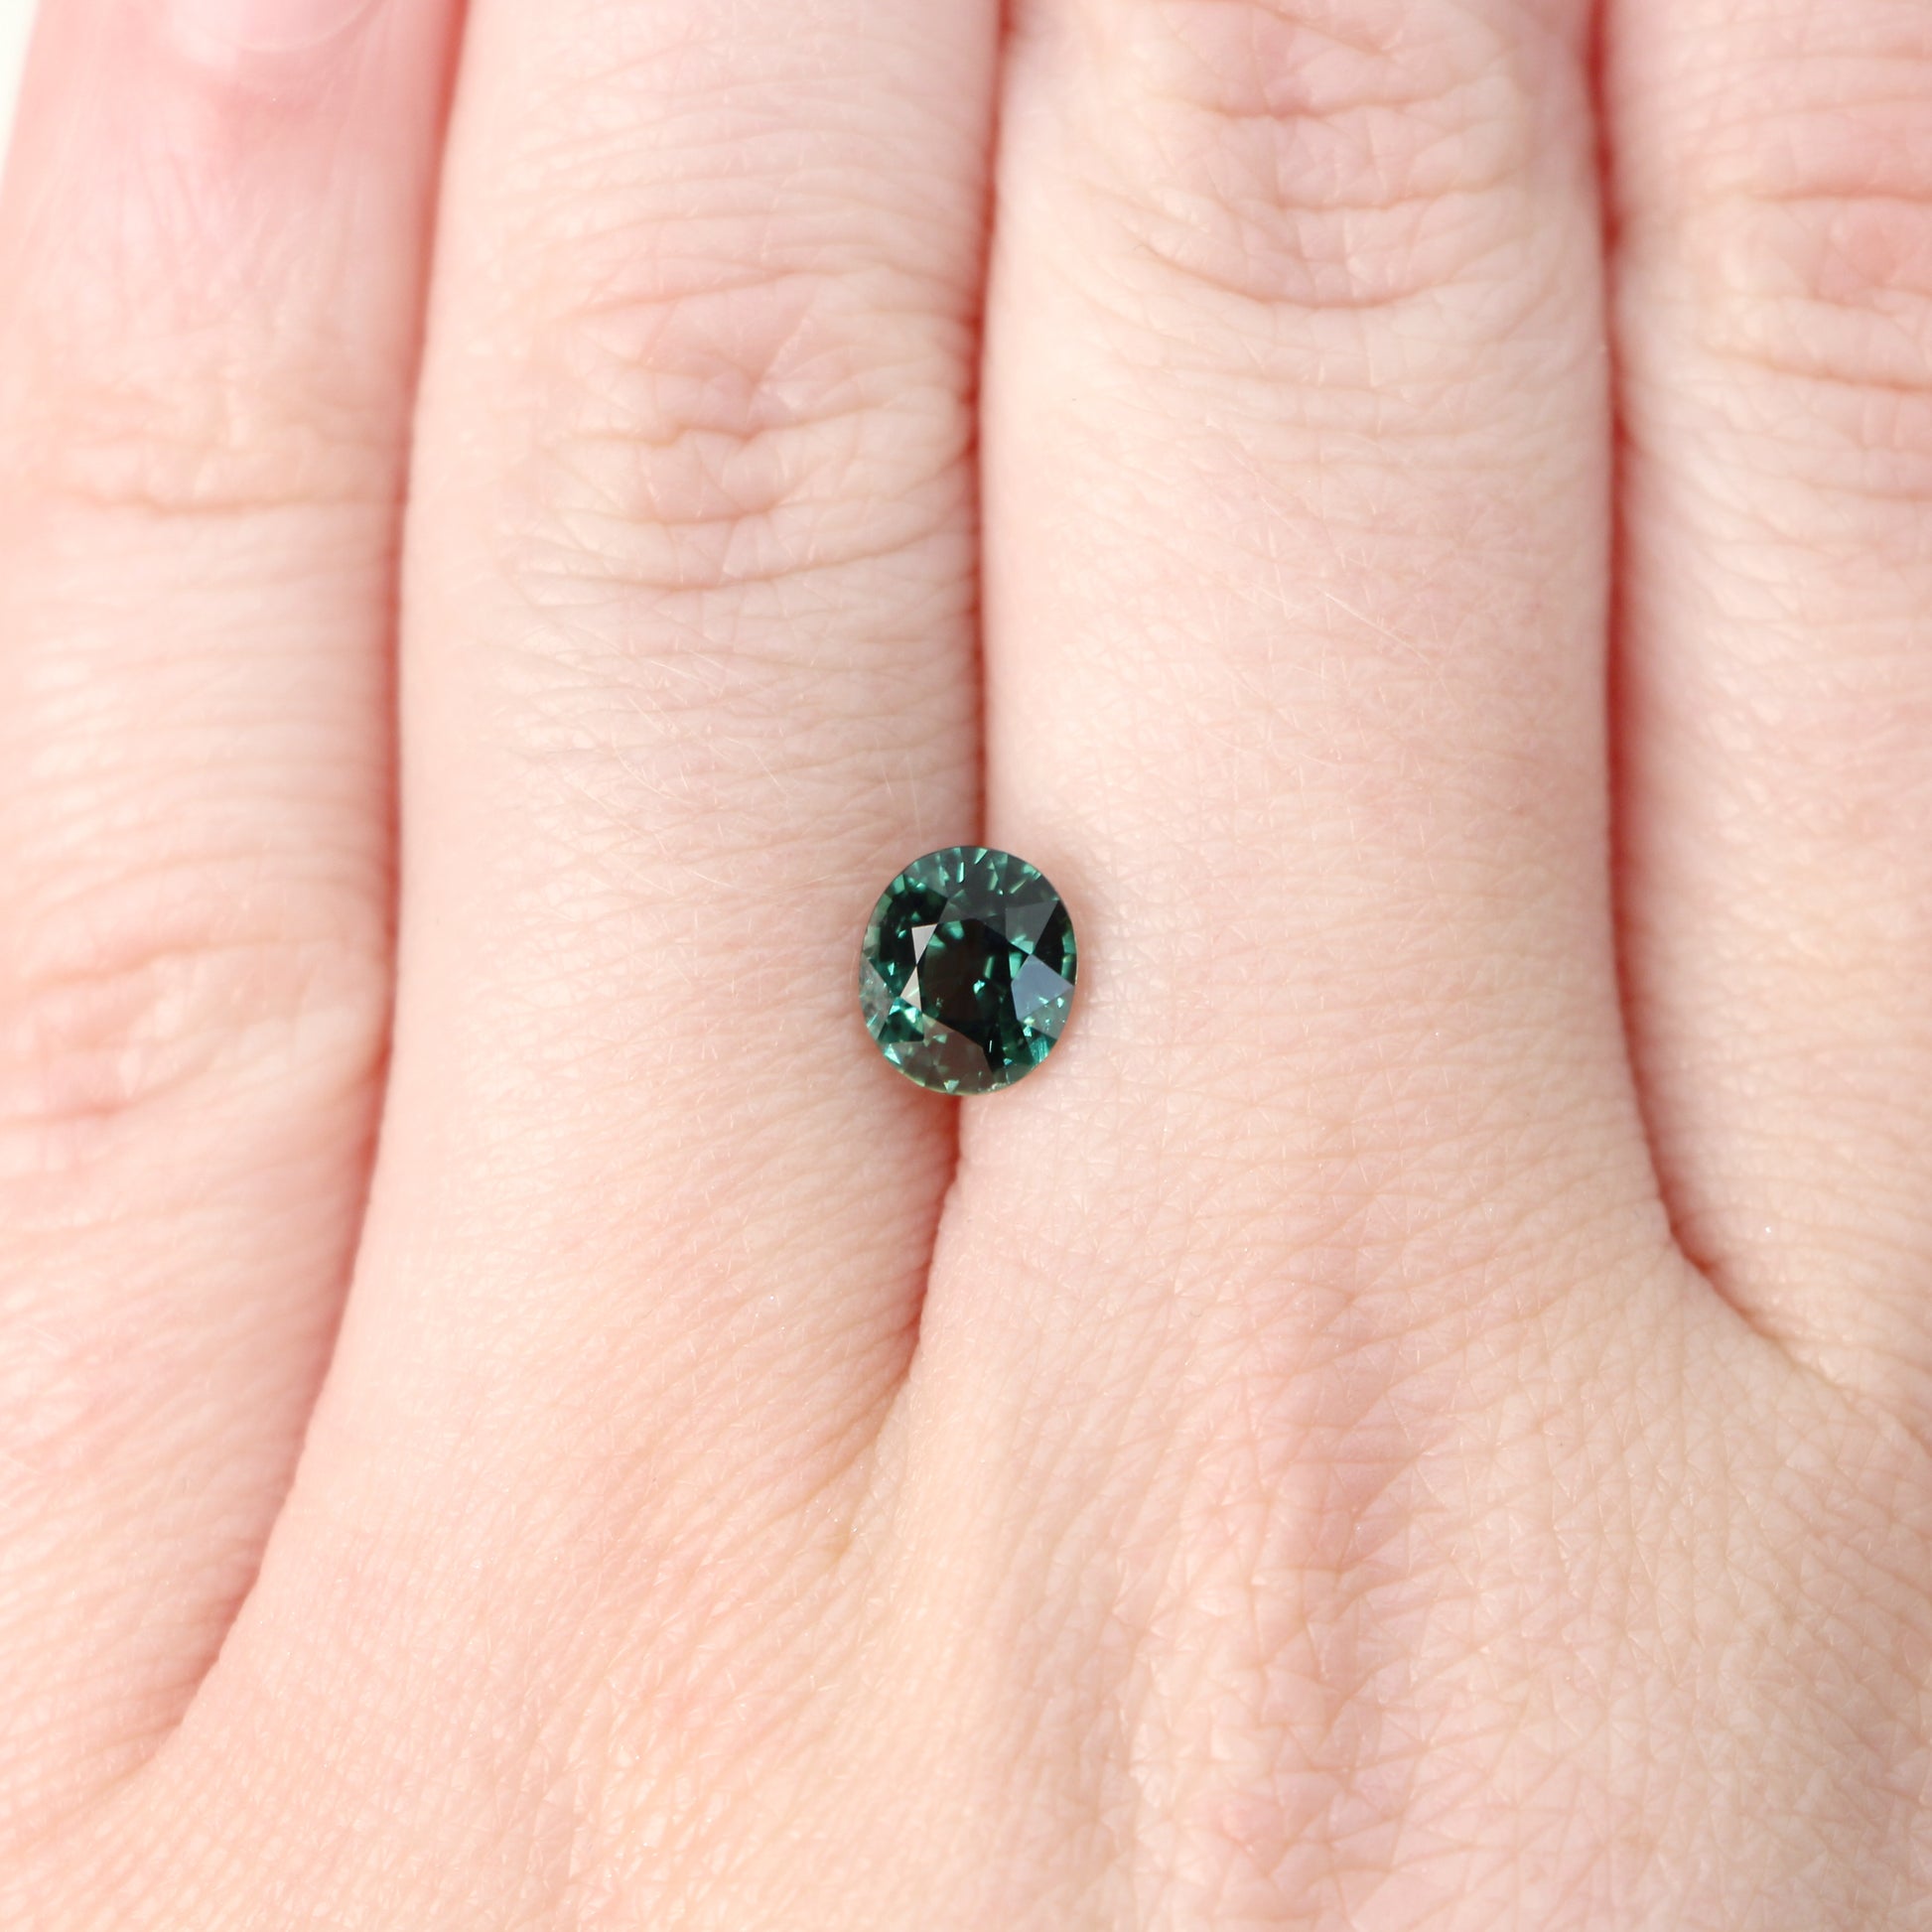 1.27 Carat Teal Green Oval Madagascar Sapphire for Custom Work - Inventory Code TGOS127 - Midwinter Co. Alternative Bridal Rings and Modern Fine Jewelry